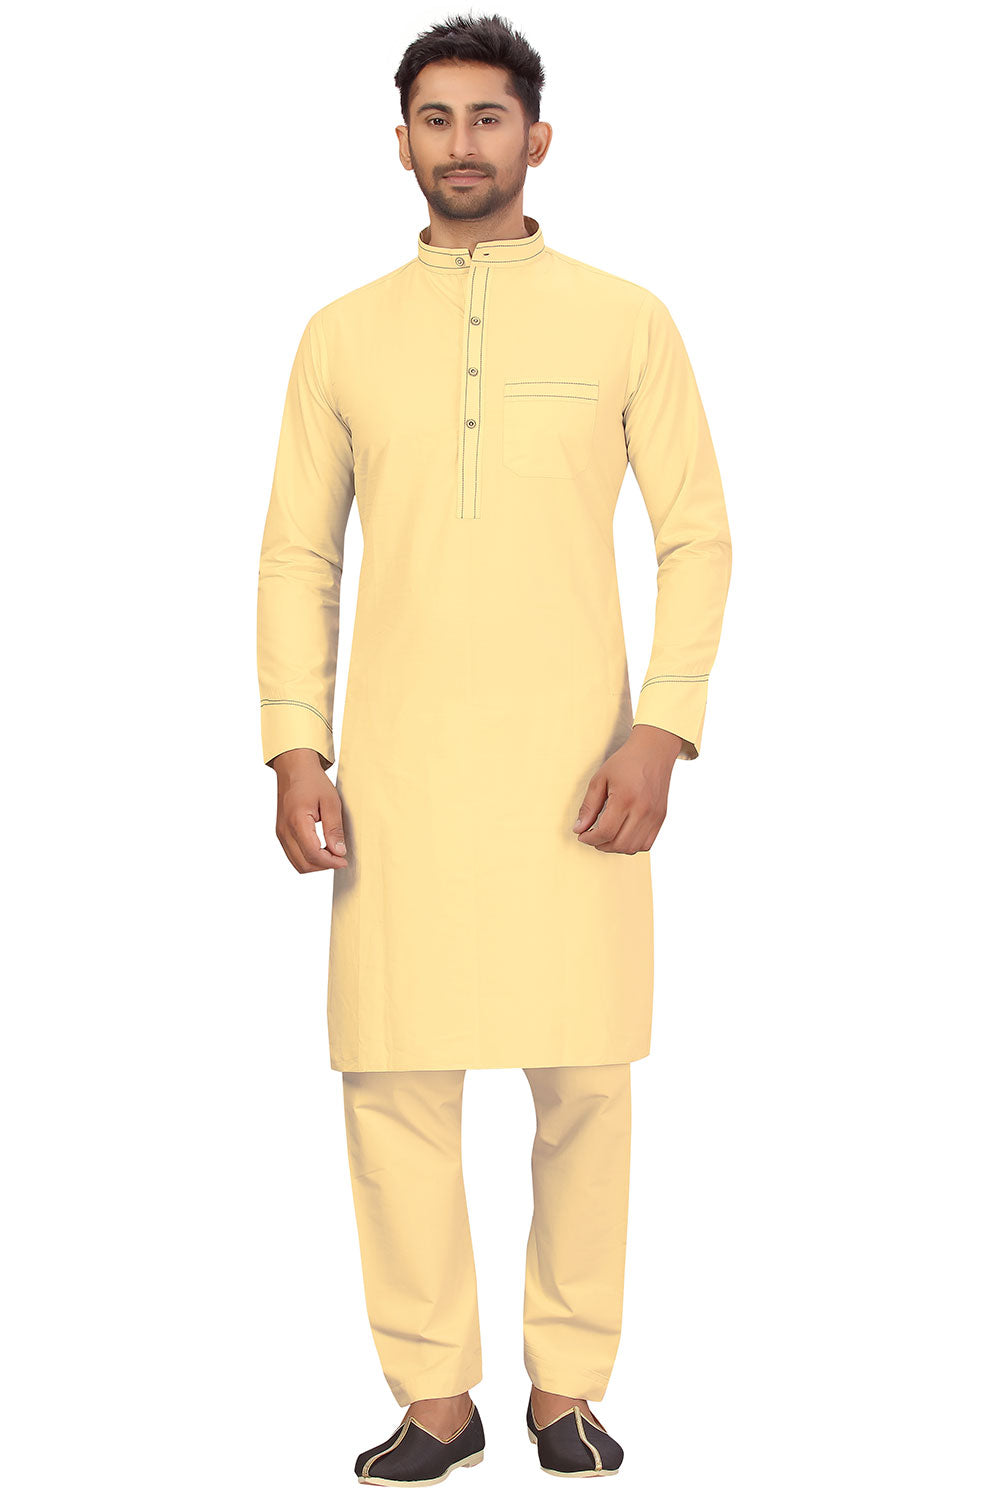 Buy Men's Blended Cotton Solid Pathani Set in Yellow Online - Back